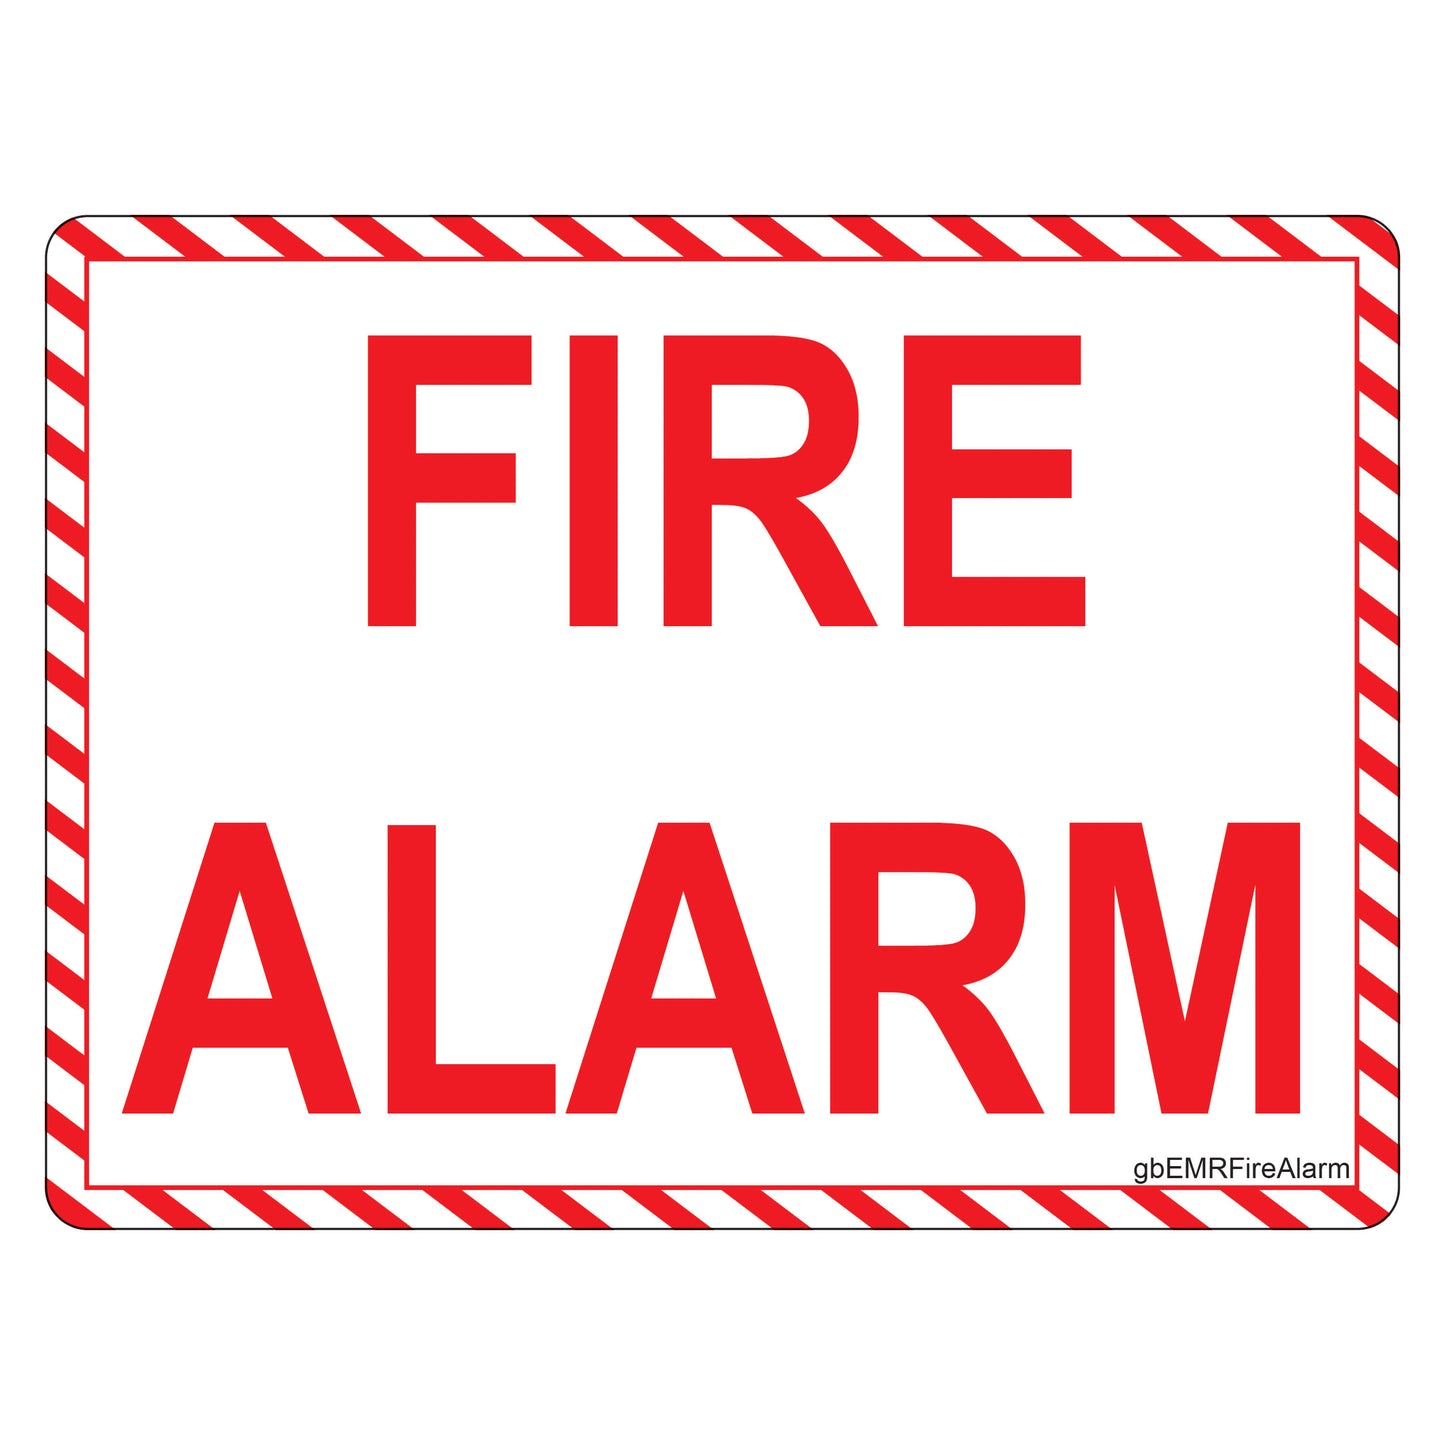 Fire Alarm Decal. 4 inches by 3 inches in size.